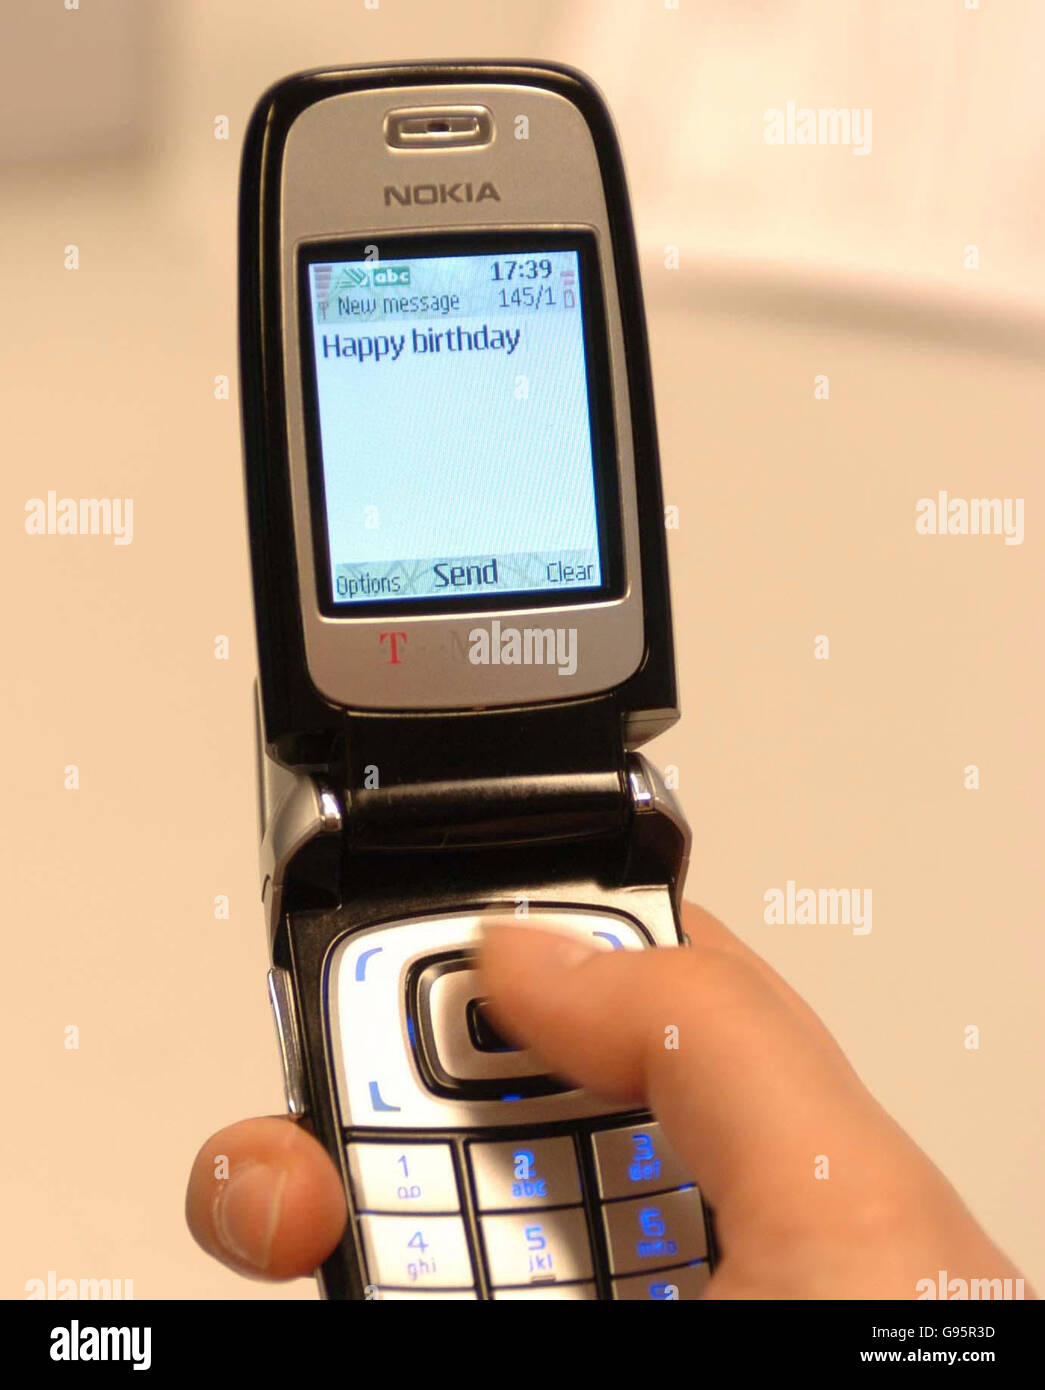 Image: Person holding a smartphone sending a birthday message